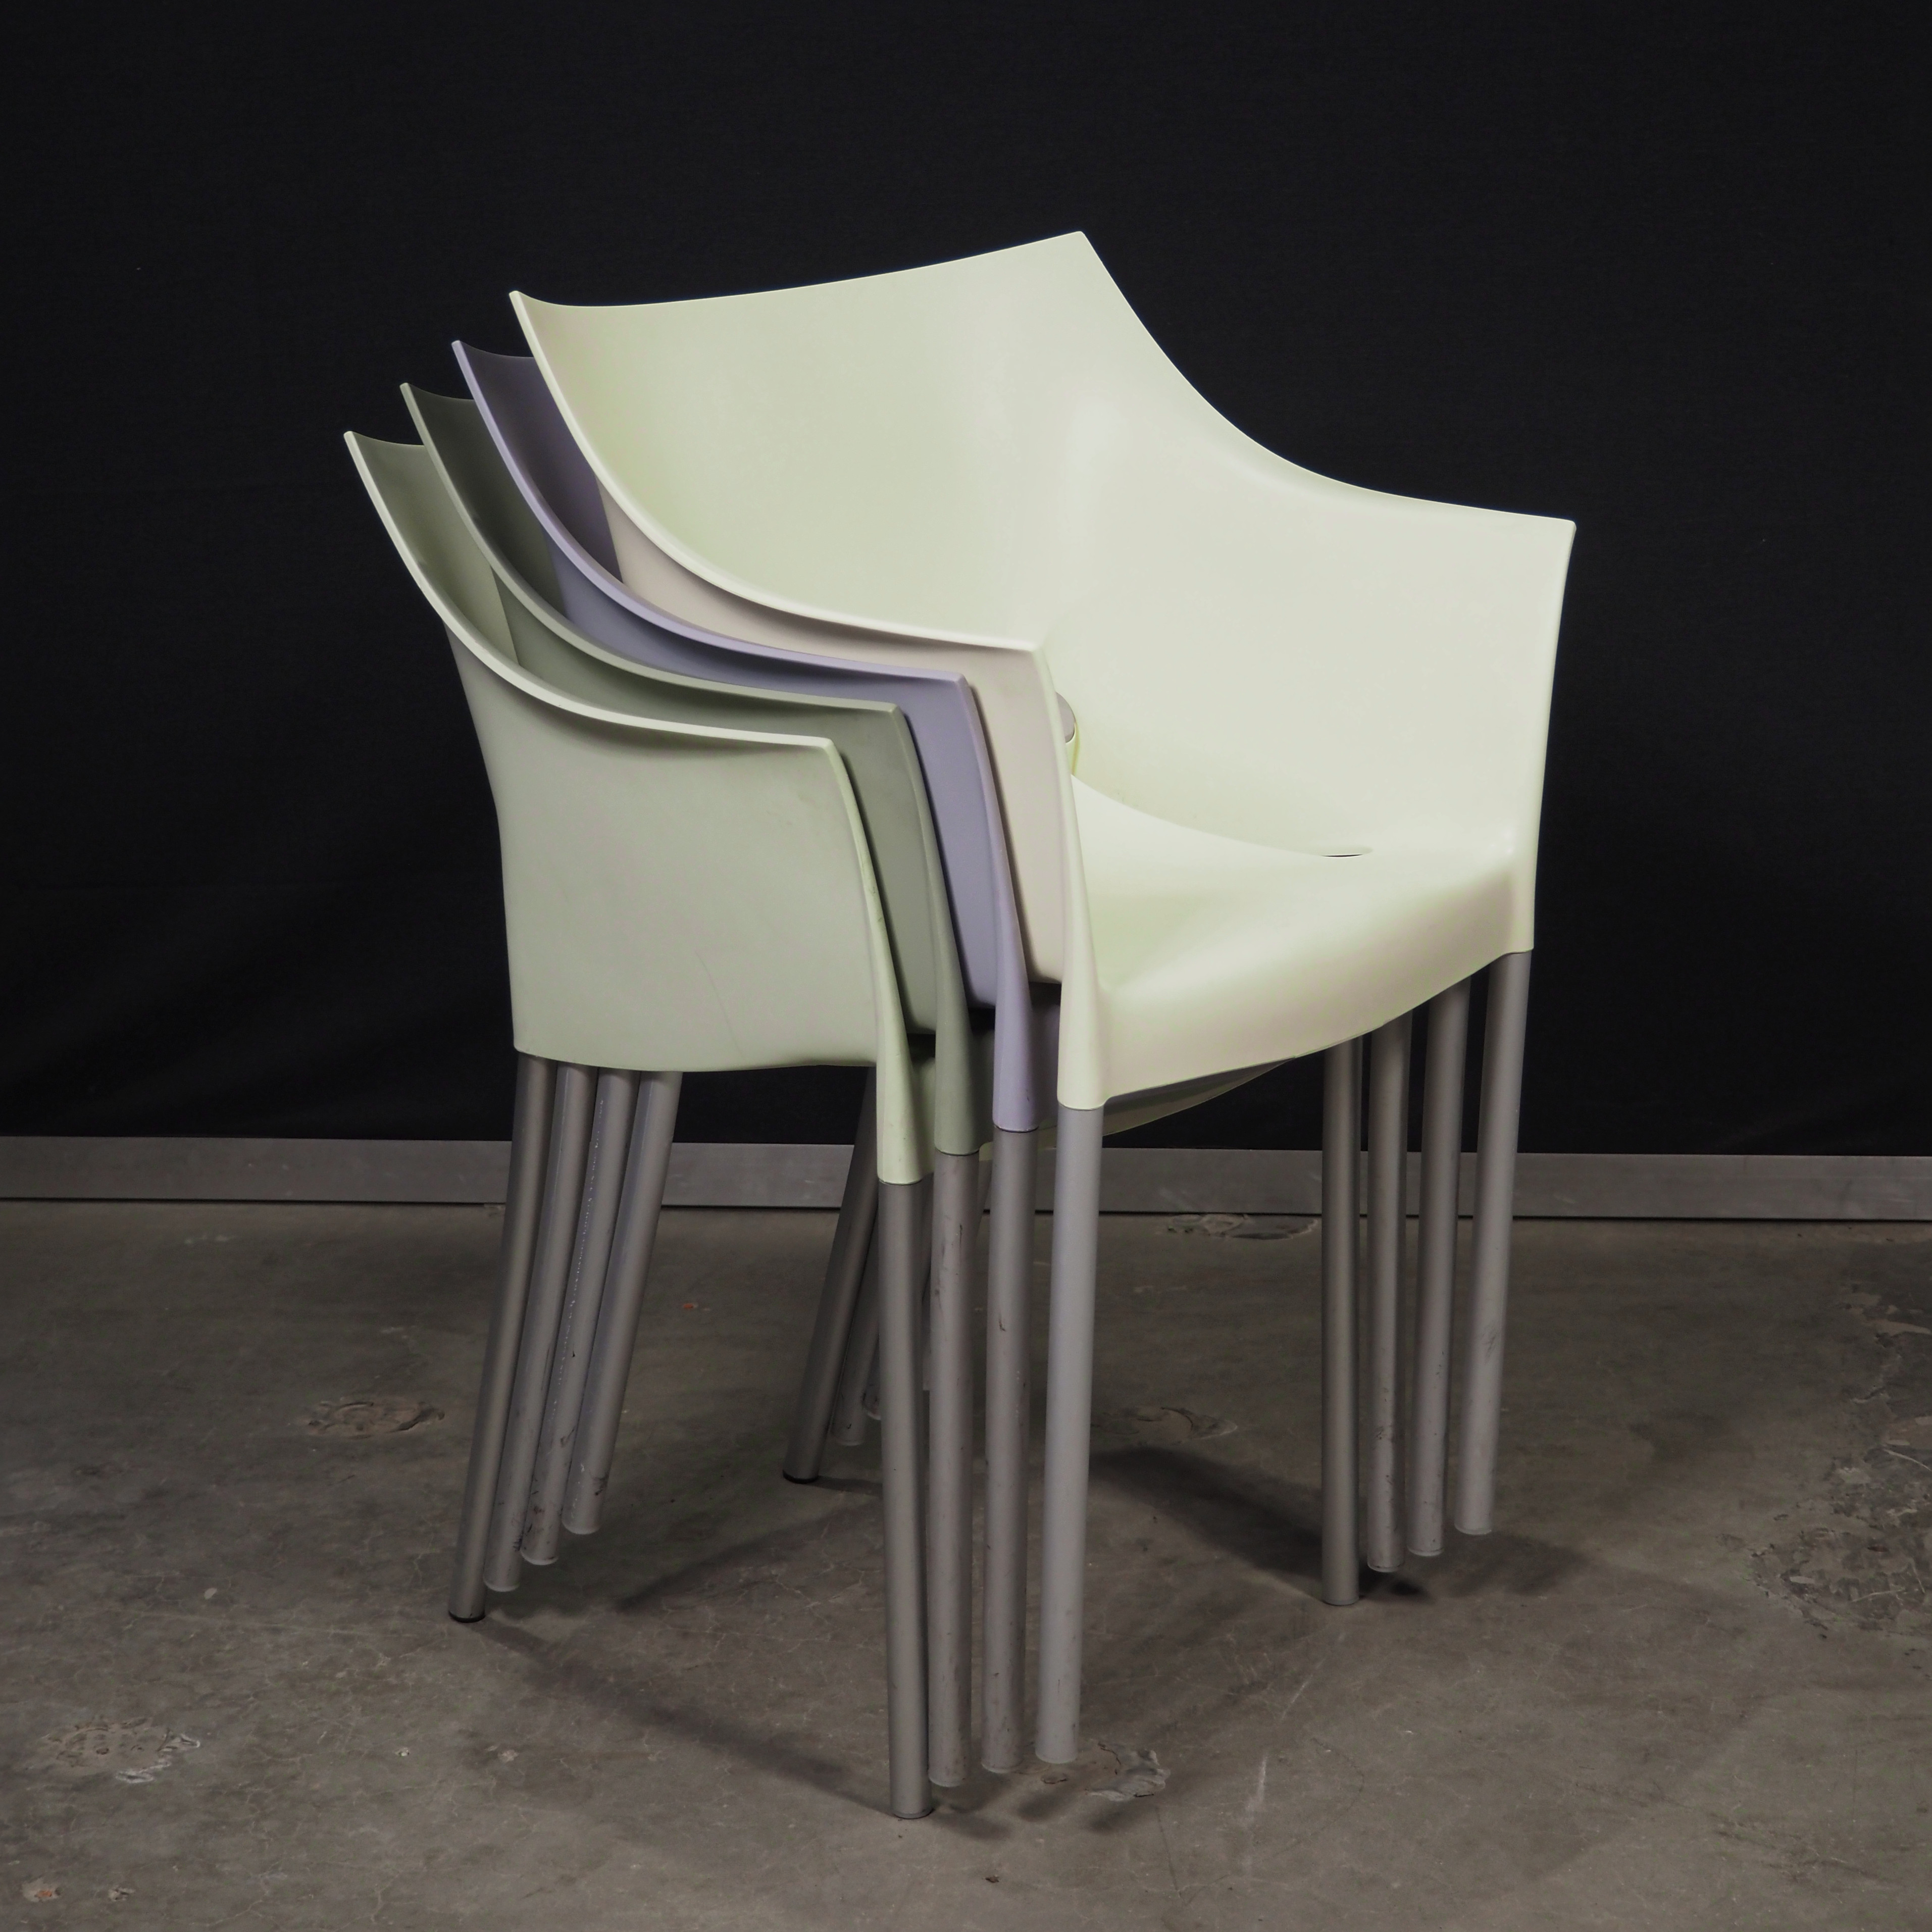 Armchair 'Dr. NO' by Philippe Starck for Kartell (ca. 1997) - Dark grey